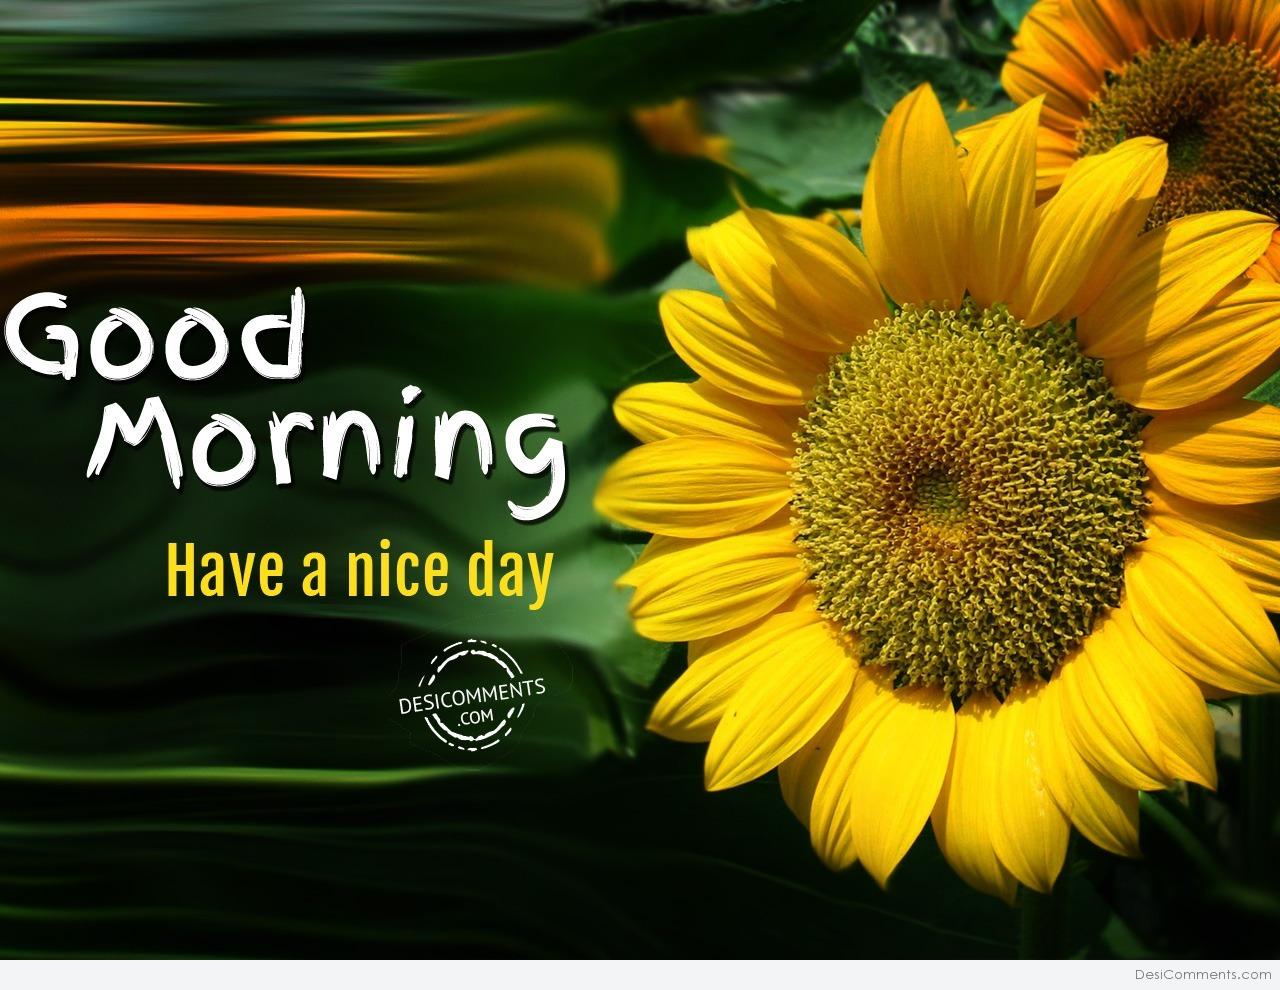 Have A Nice Day – Good Morning - DesiComments.com